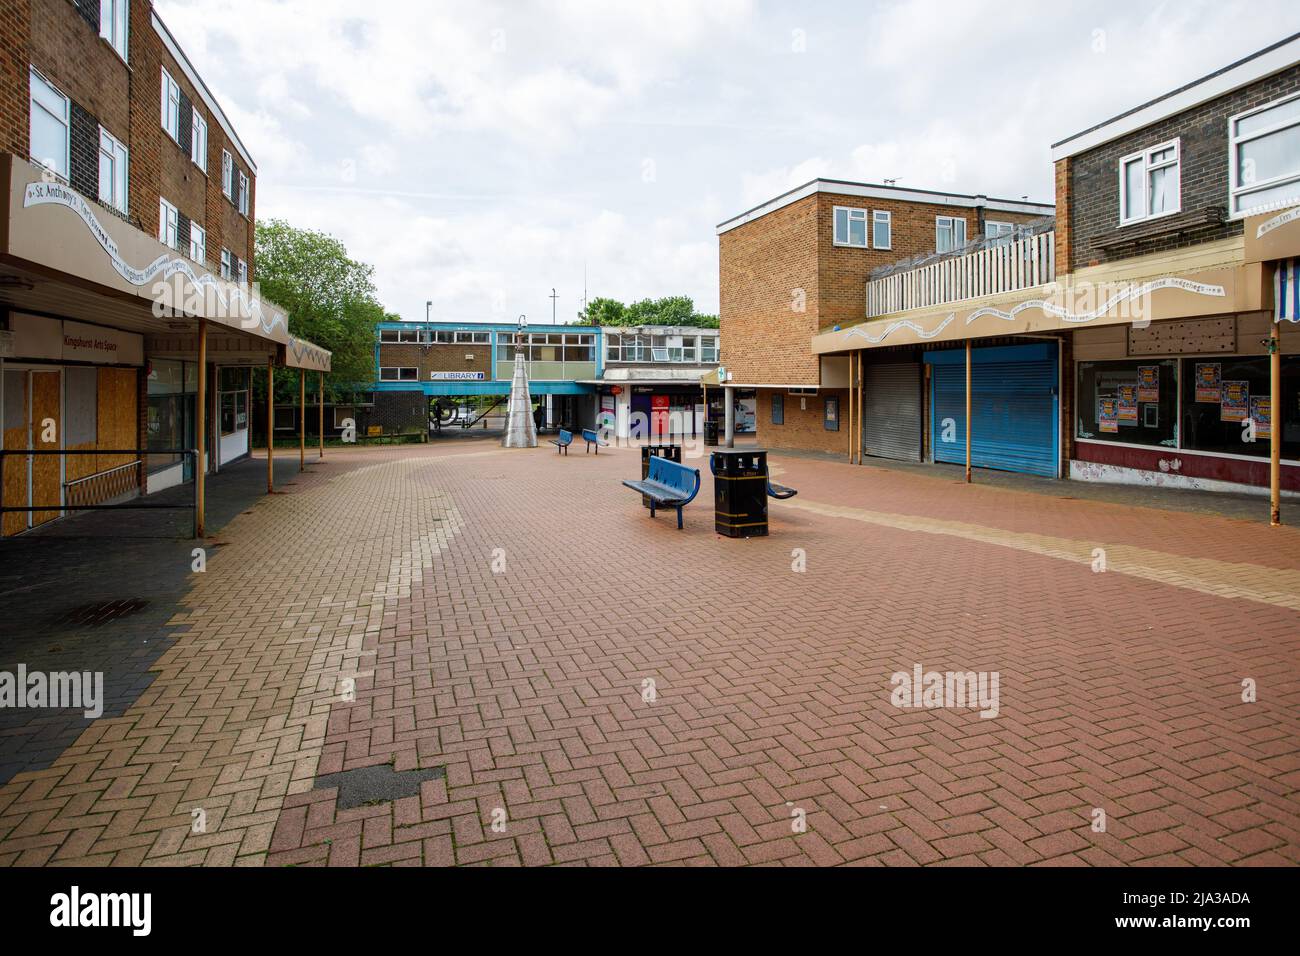 Kingshurst shopping centre. The centre is due to be demolished in the summer of 2022 to make way for a new development of shops and housing. The shopping centre is typical of those developed in the 1950, 1960 and 1970 period. Stock Photo